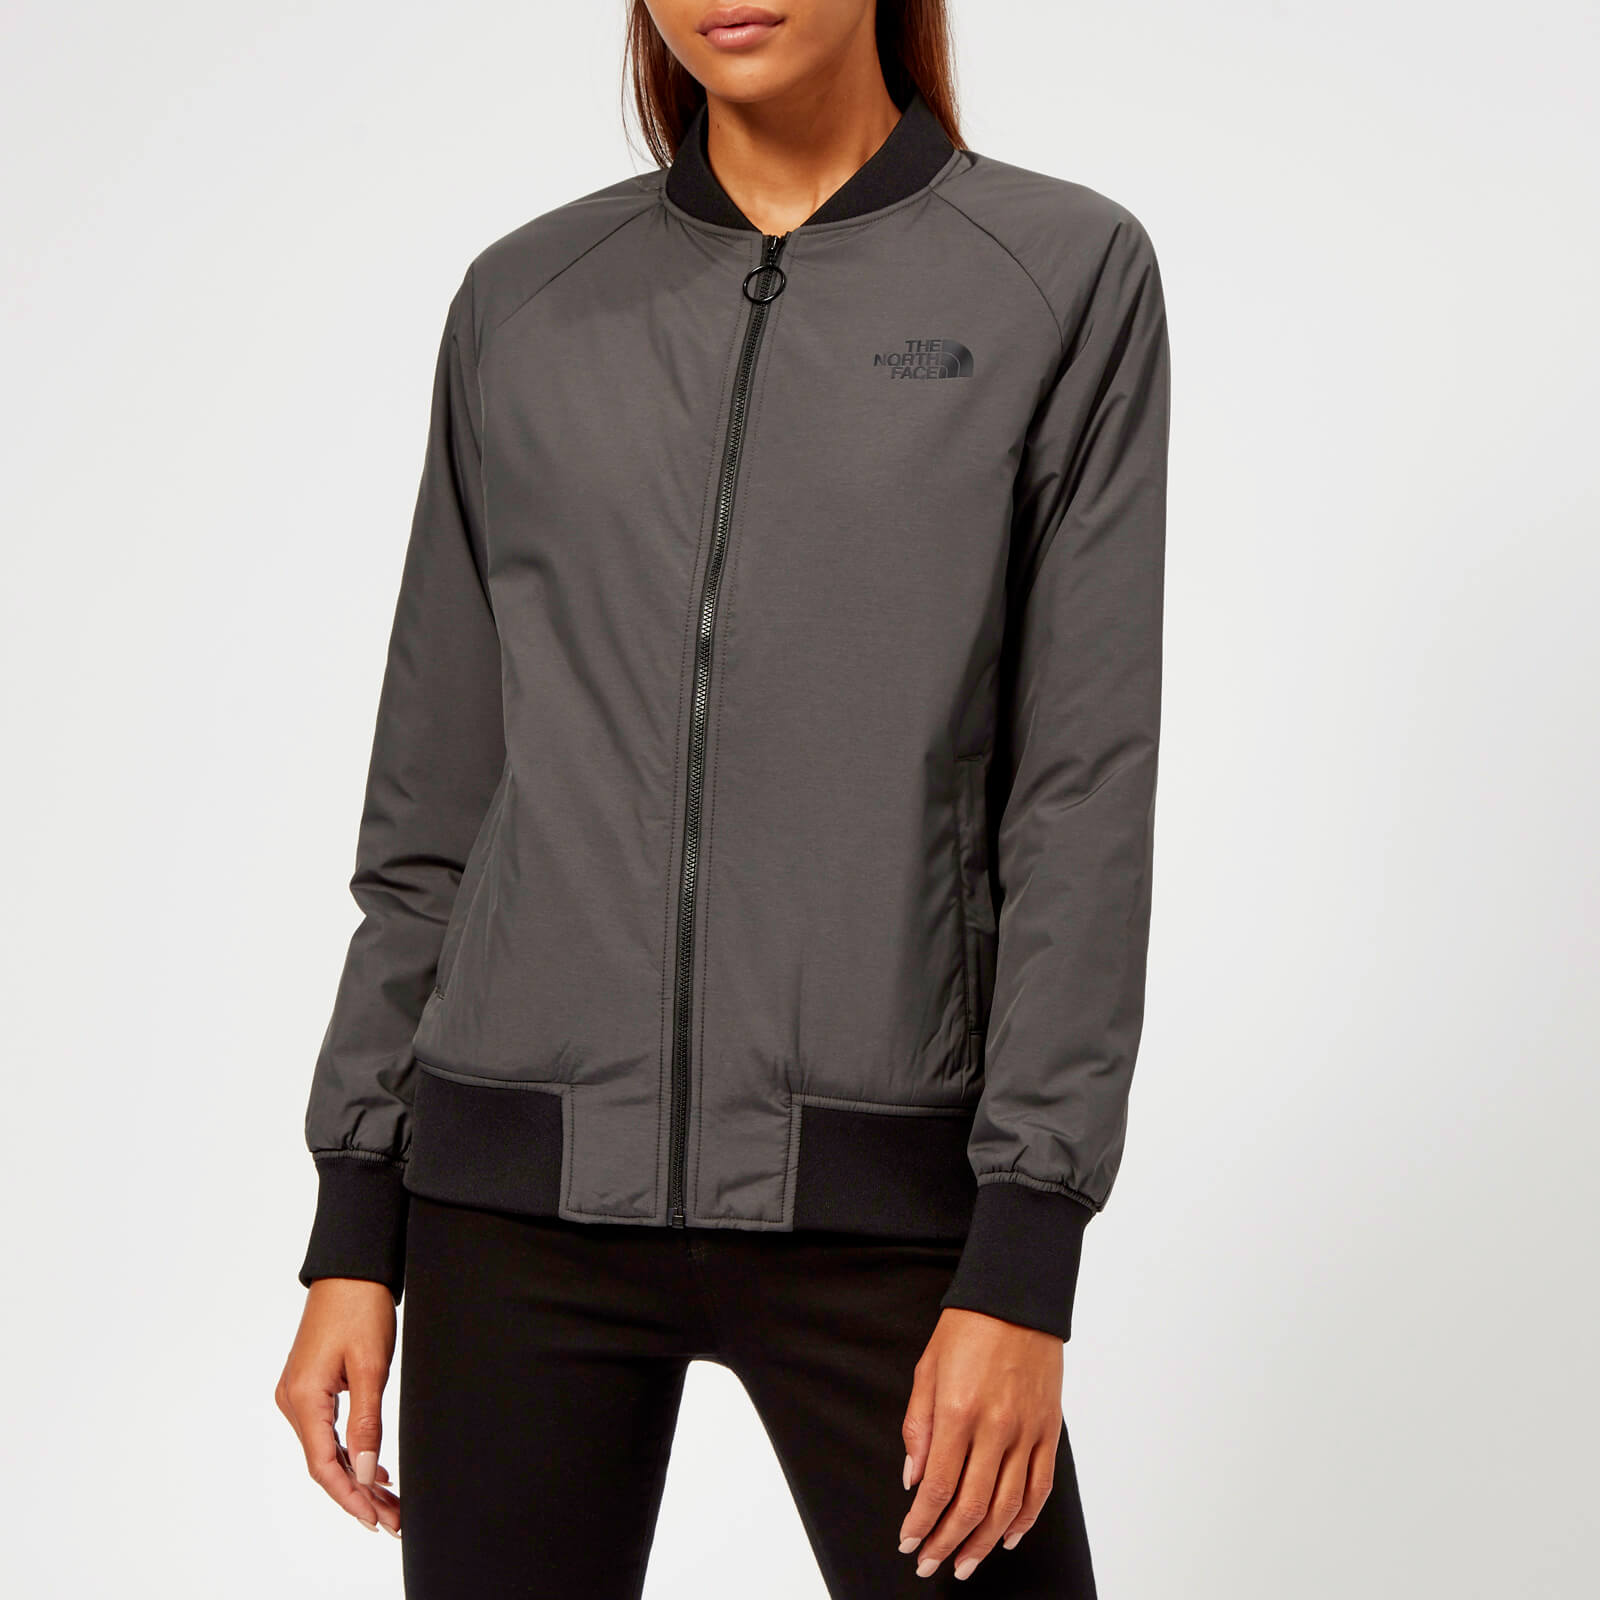 north face bomber jacket womens